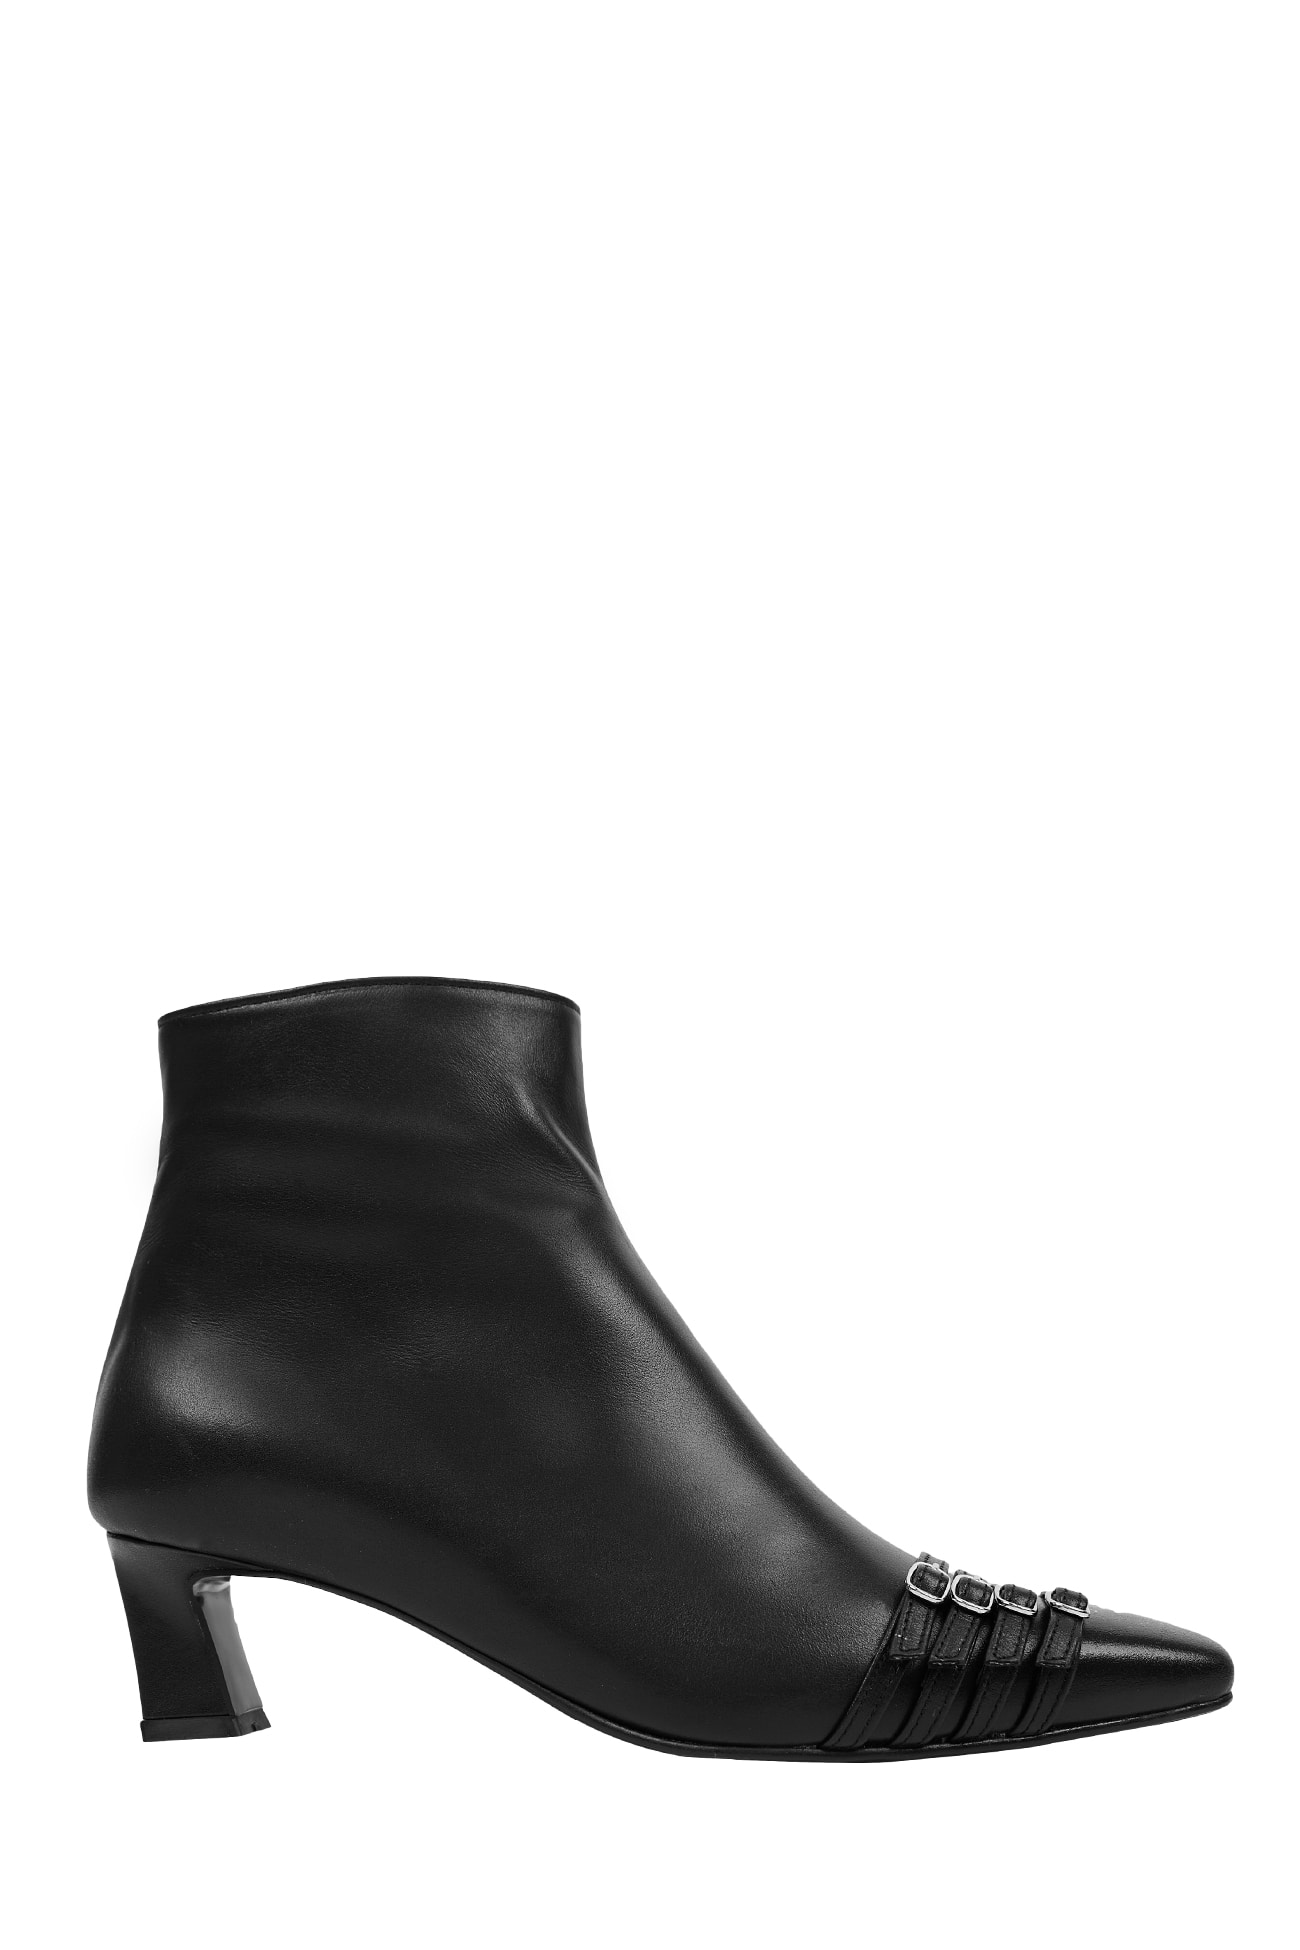 BUCKLE ANKLE BOOTS / BLACK, 세릭